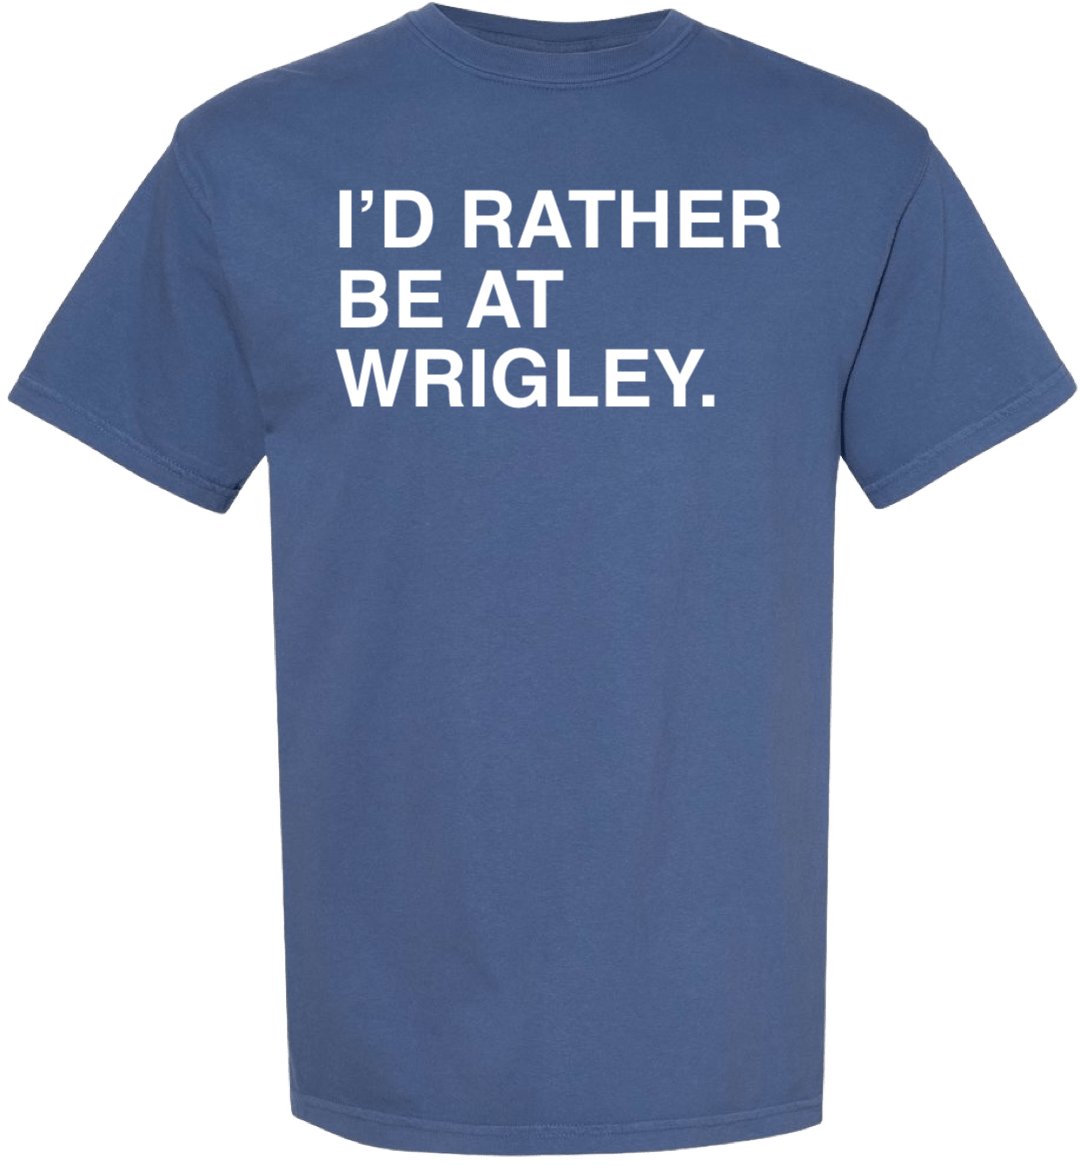 I'D RATHER BE AT WRIGLEY COMFORT COLORS. - OBVIOUS SHIRTS